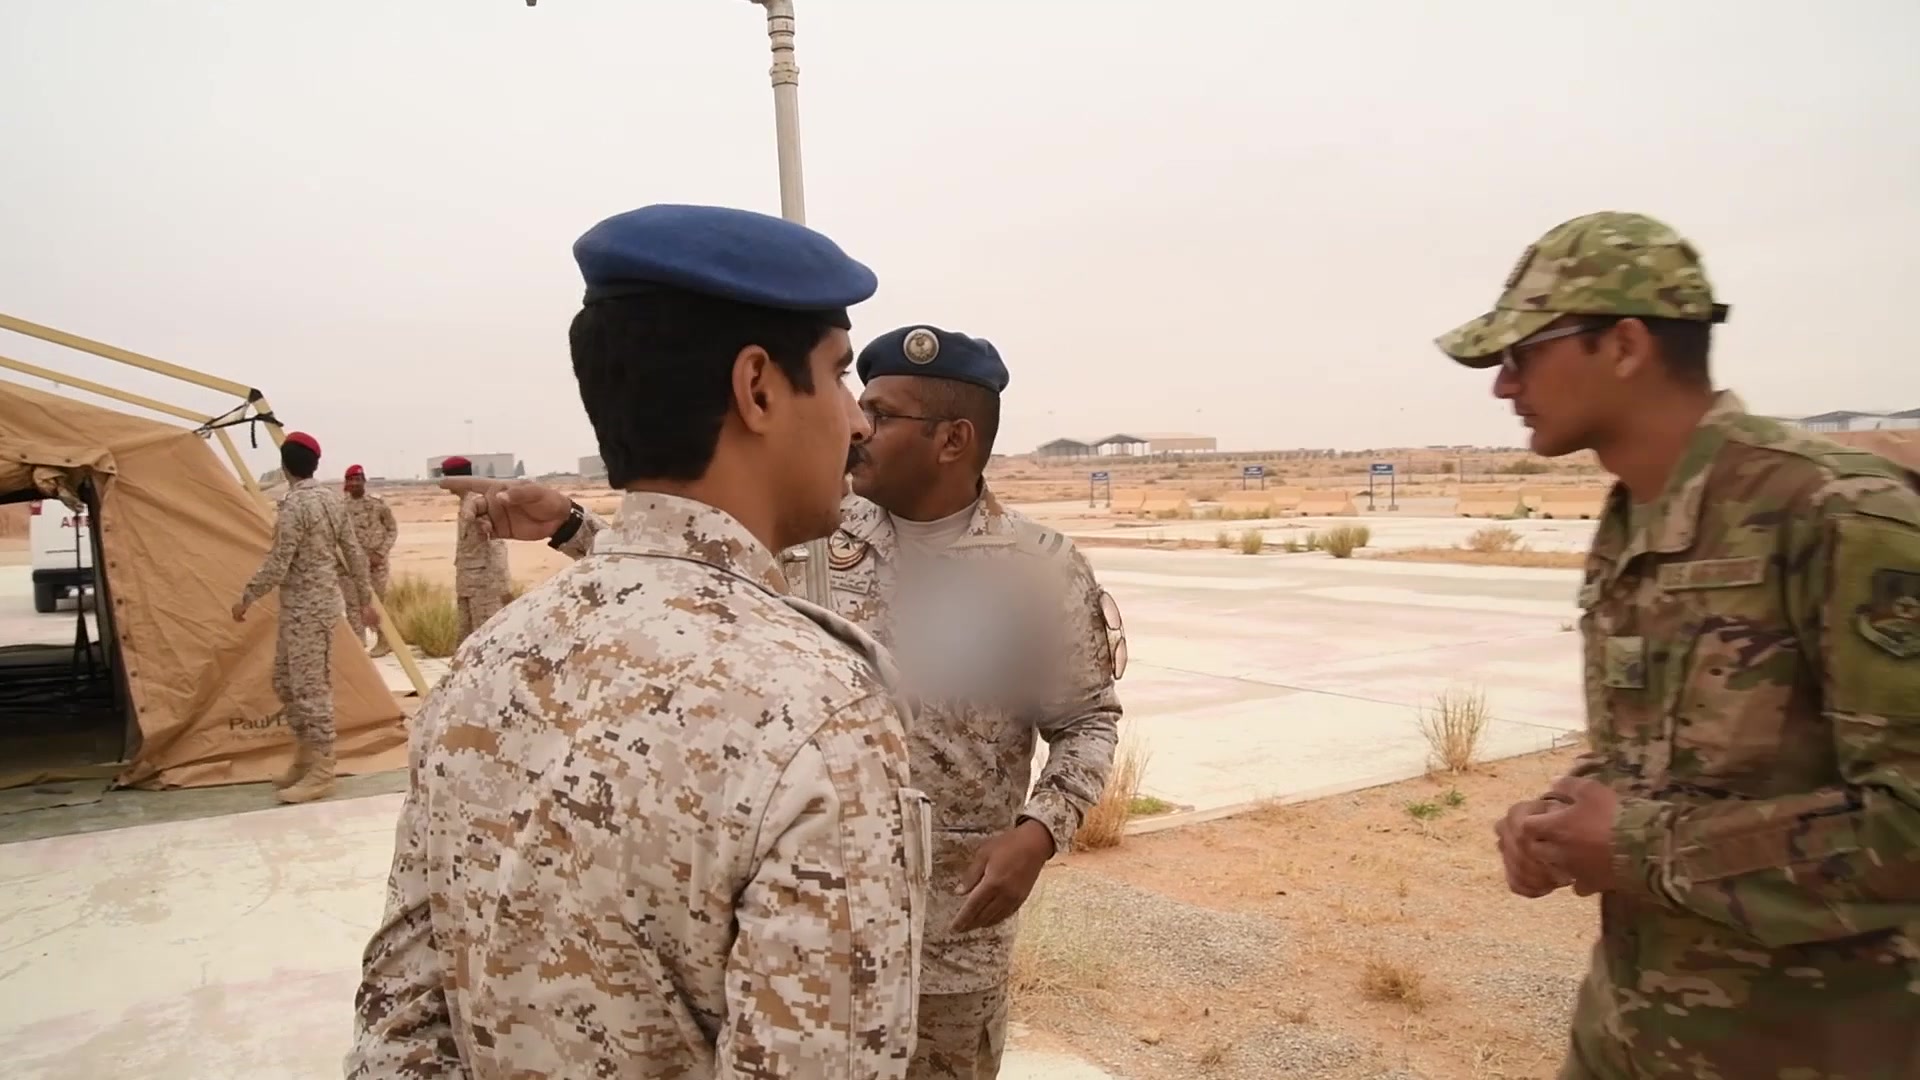 The Emergency Management Office participated in a CBRN exercise with the Royal Saudi Air Force on Dec. 10, 2019 at Prince Sultan Air Base, Kingdom of Saudi Arabia. The exercise was used to determine how the U.S. Air Force would complement the KSA in real world contingencies.